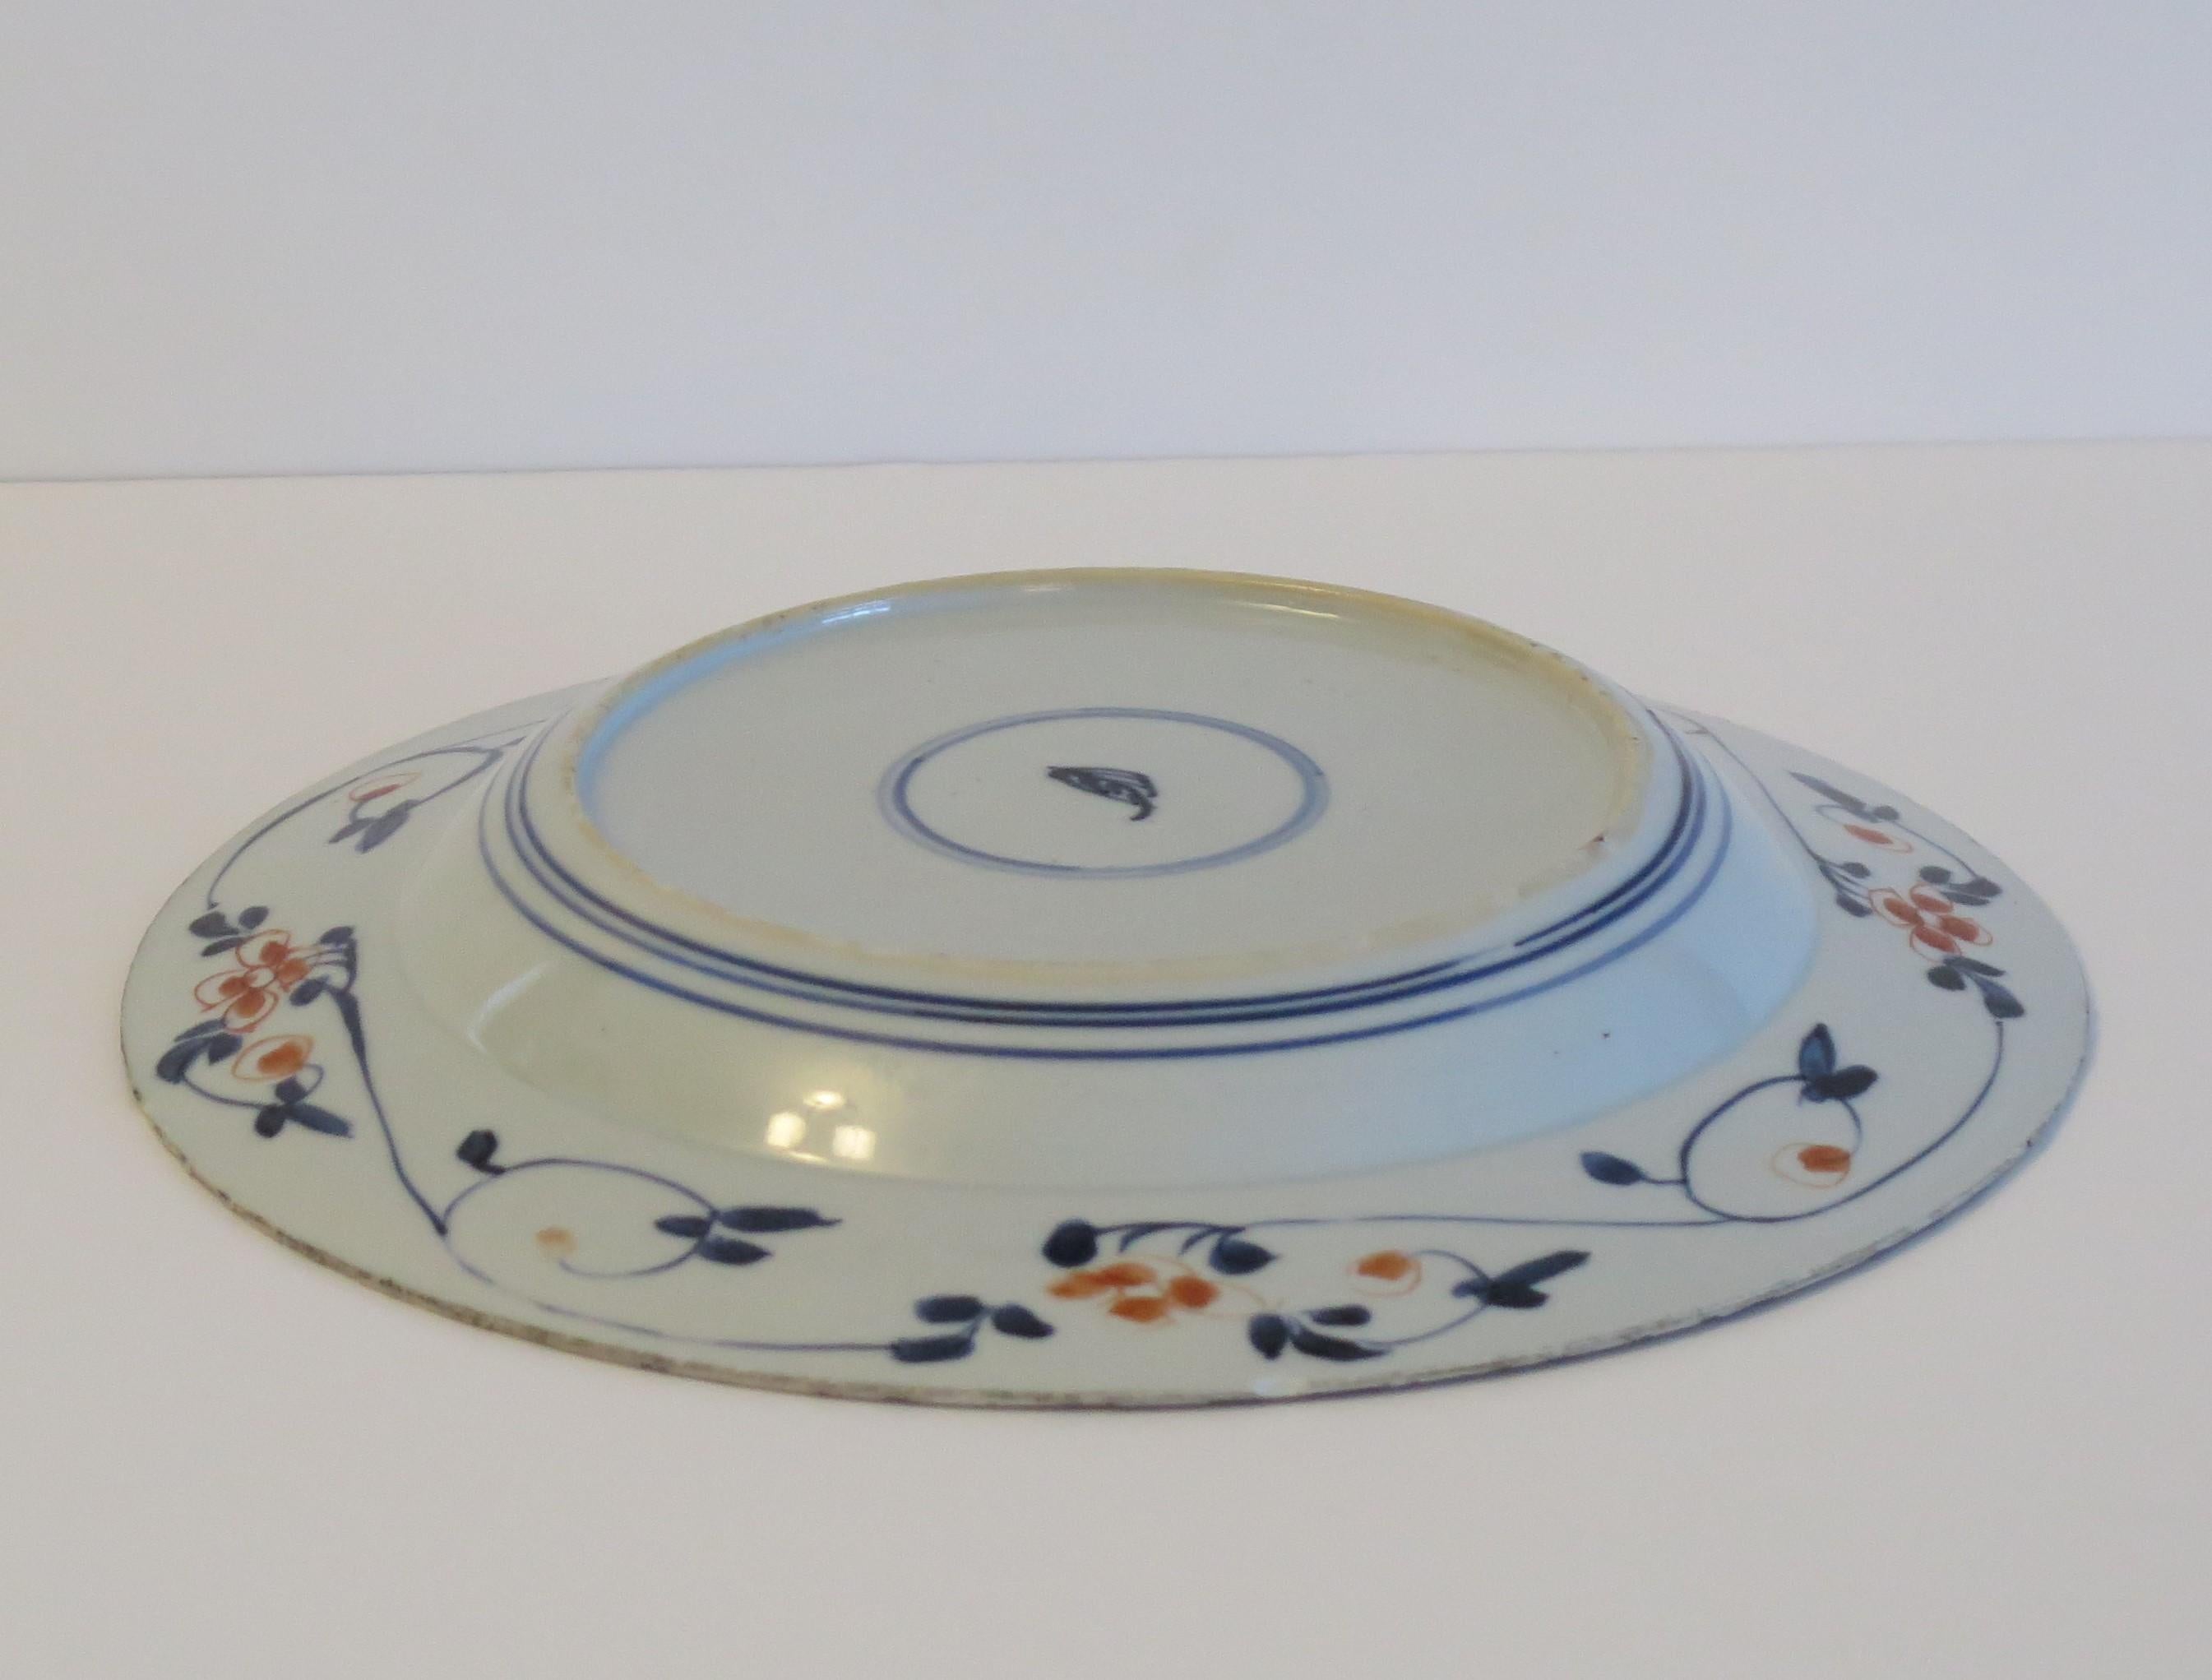 Chinese Porcelain Plate or Bowl Qing Kangxi Mark and Period, Ca 1700 For Sale 2